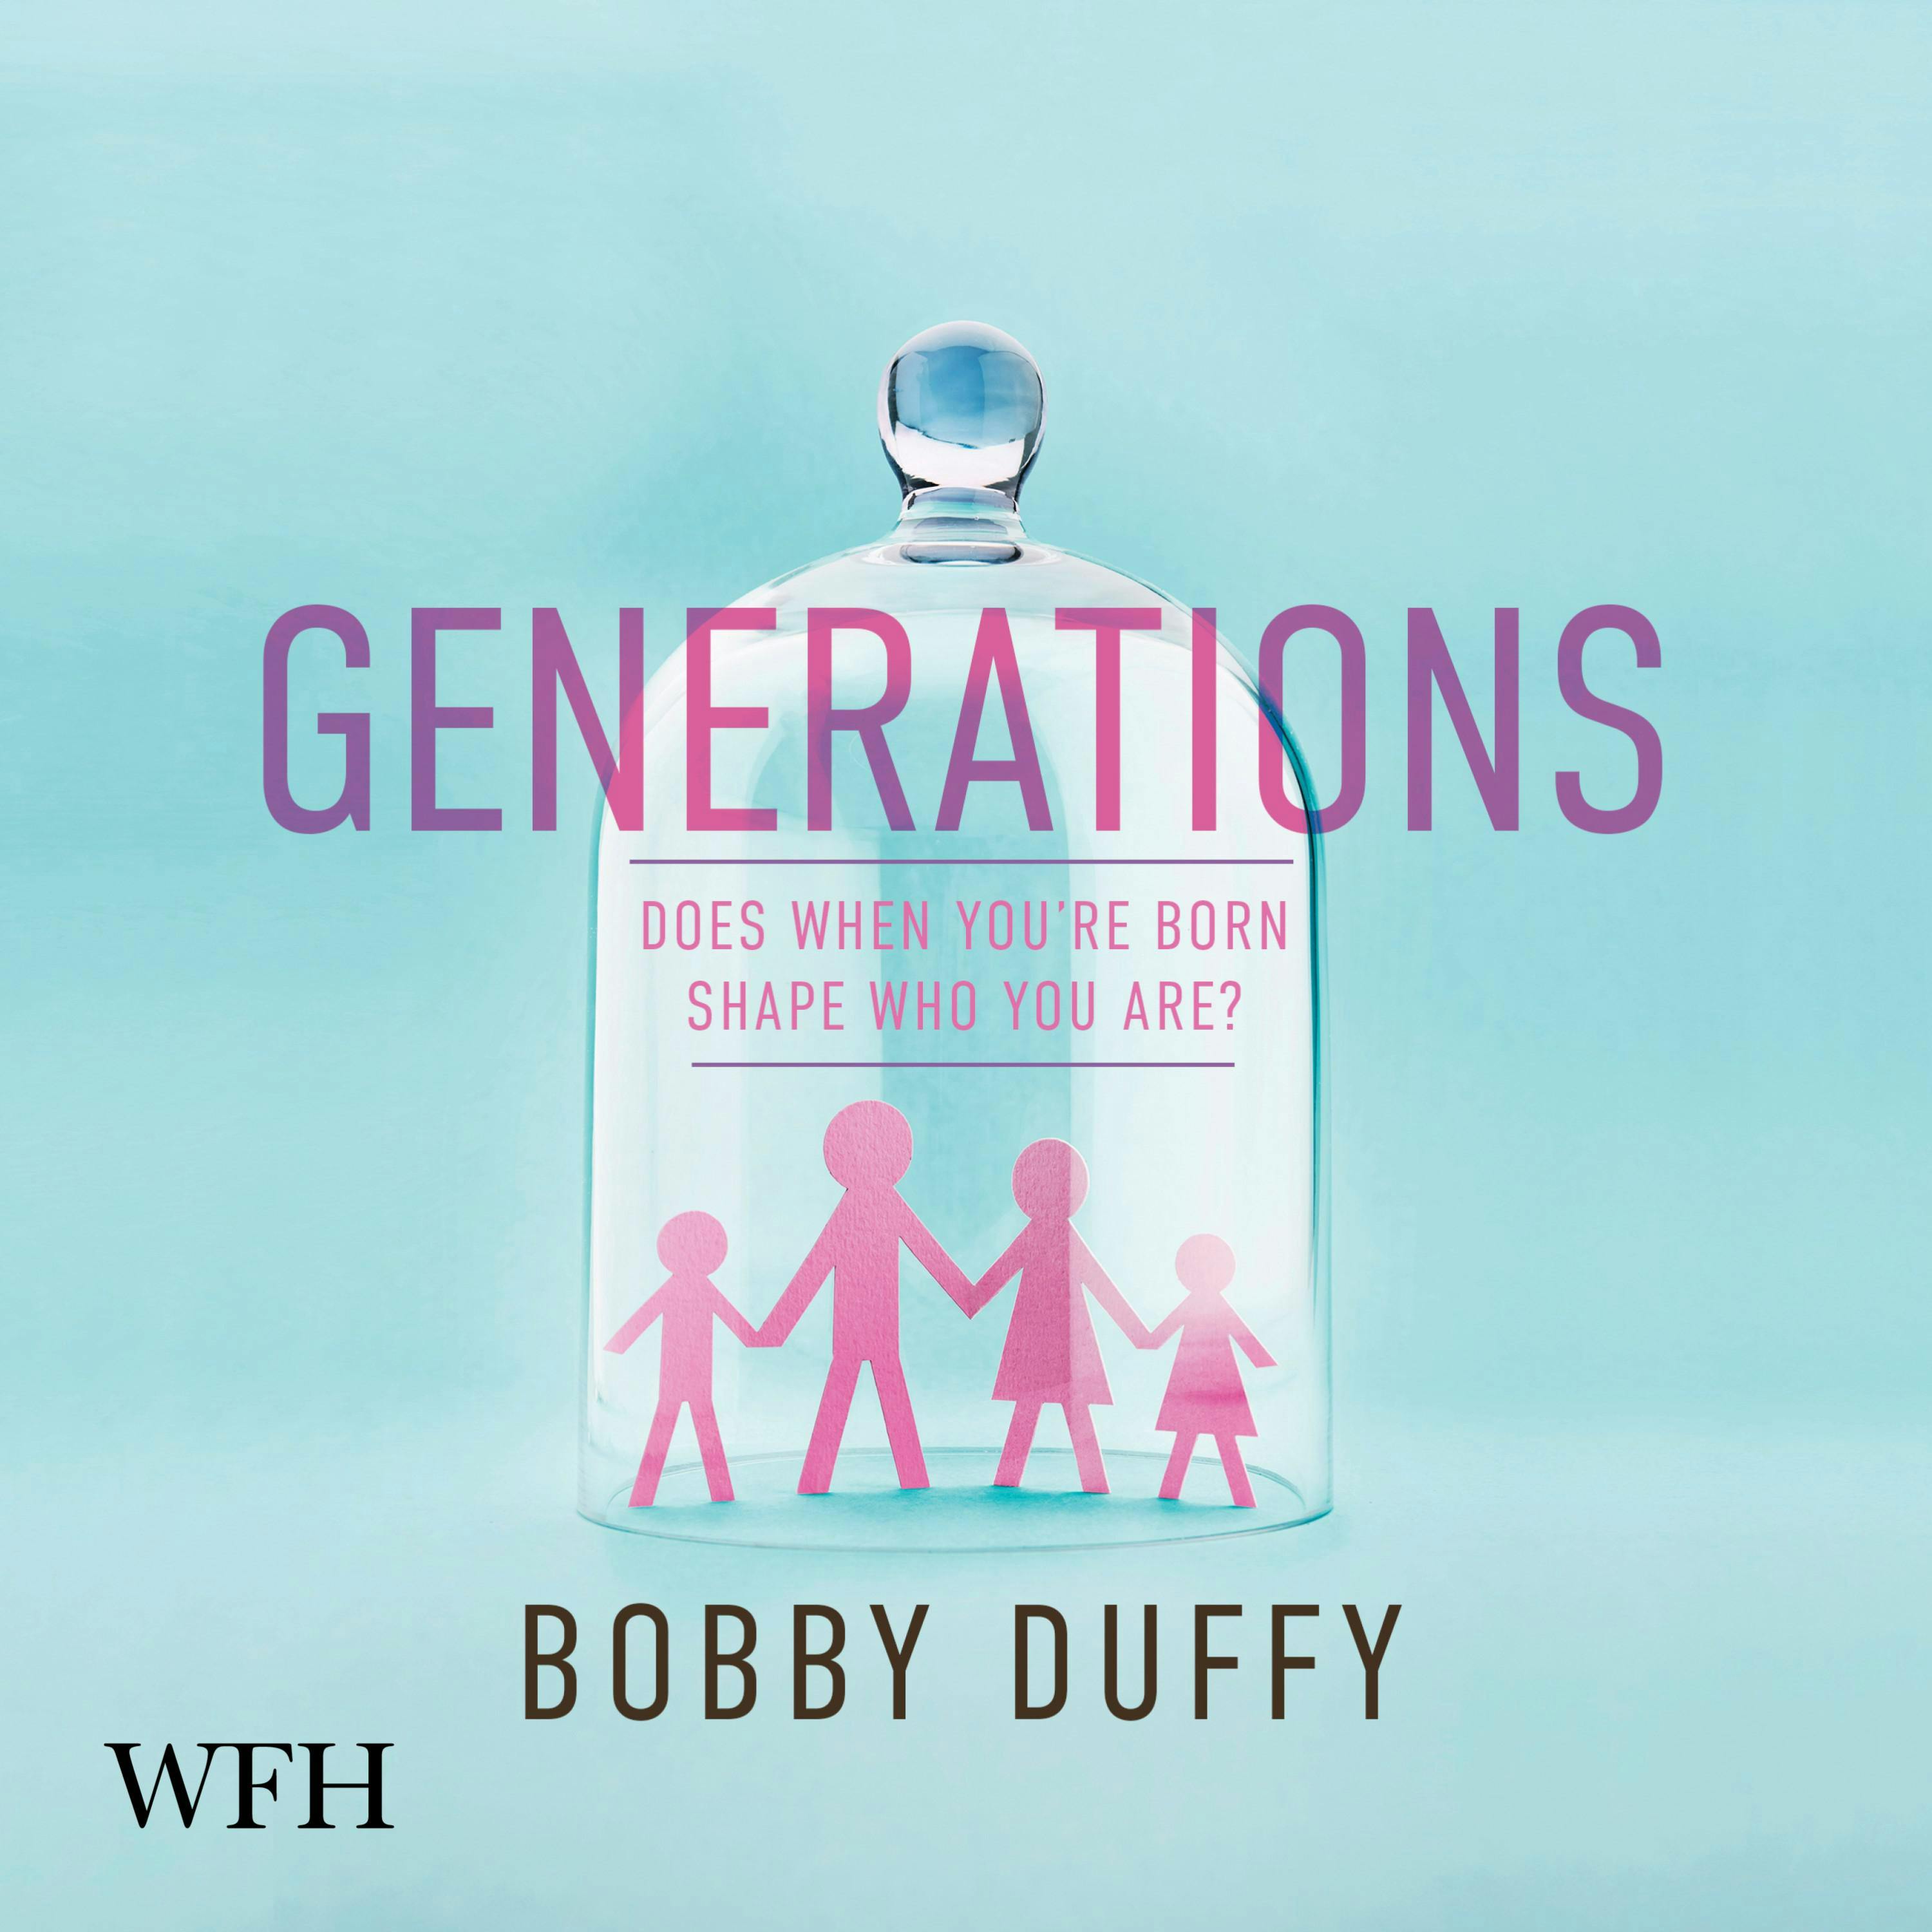 Generations: Does When You’re Born Shape Who You Are? - undefined